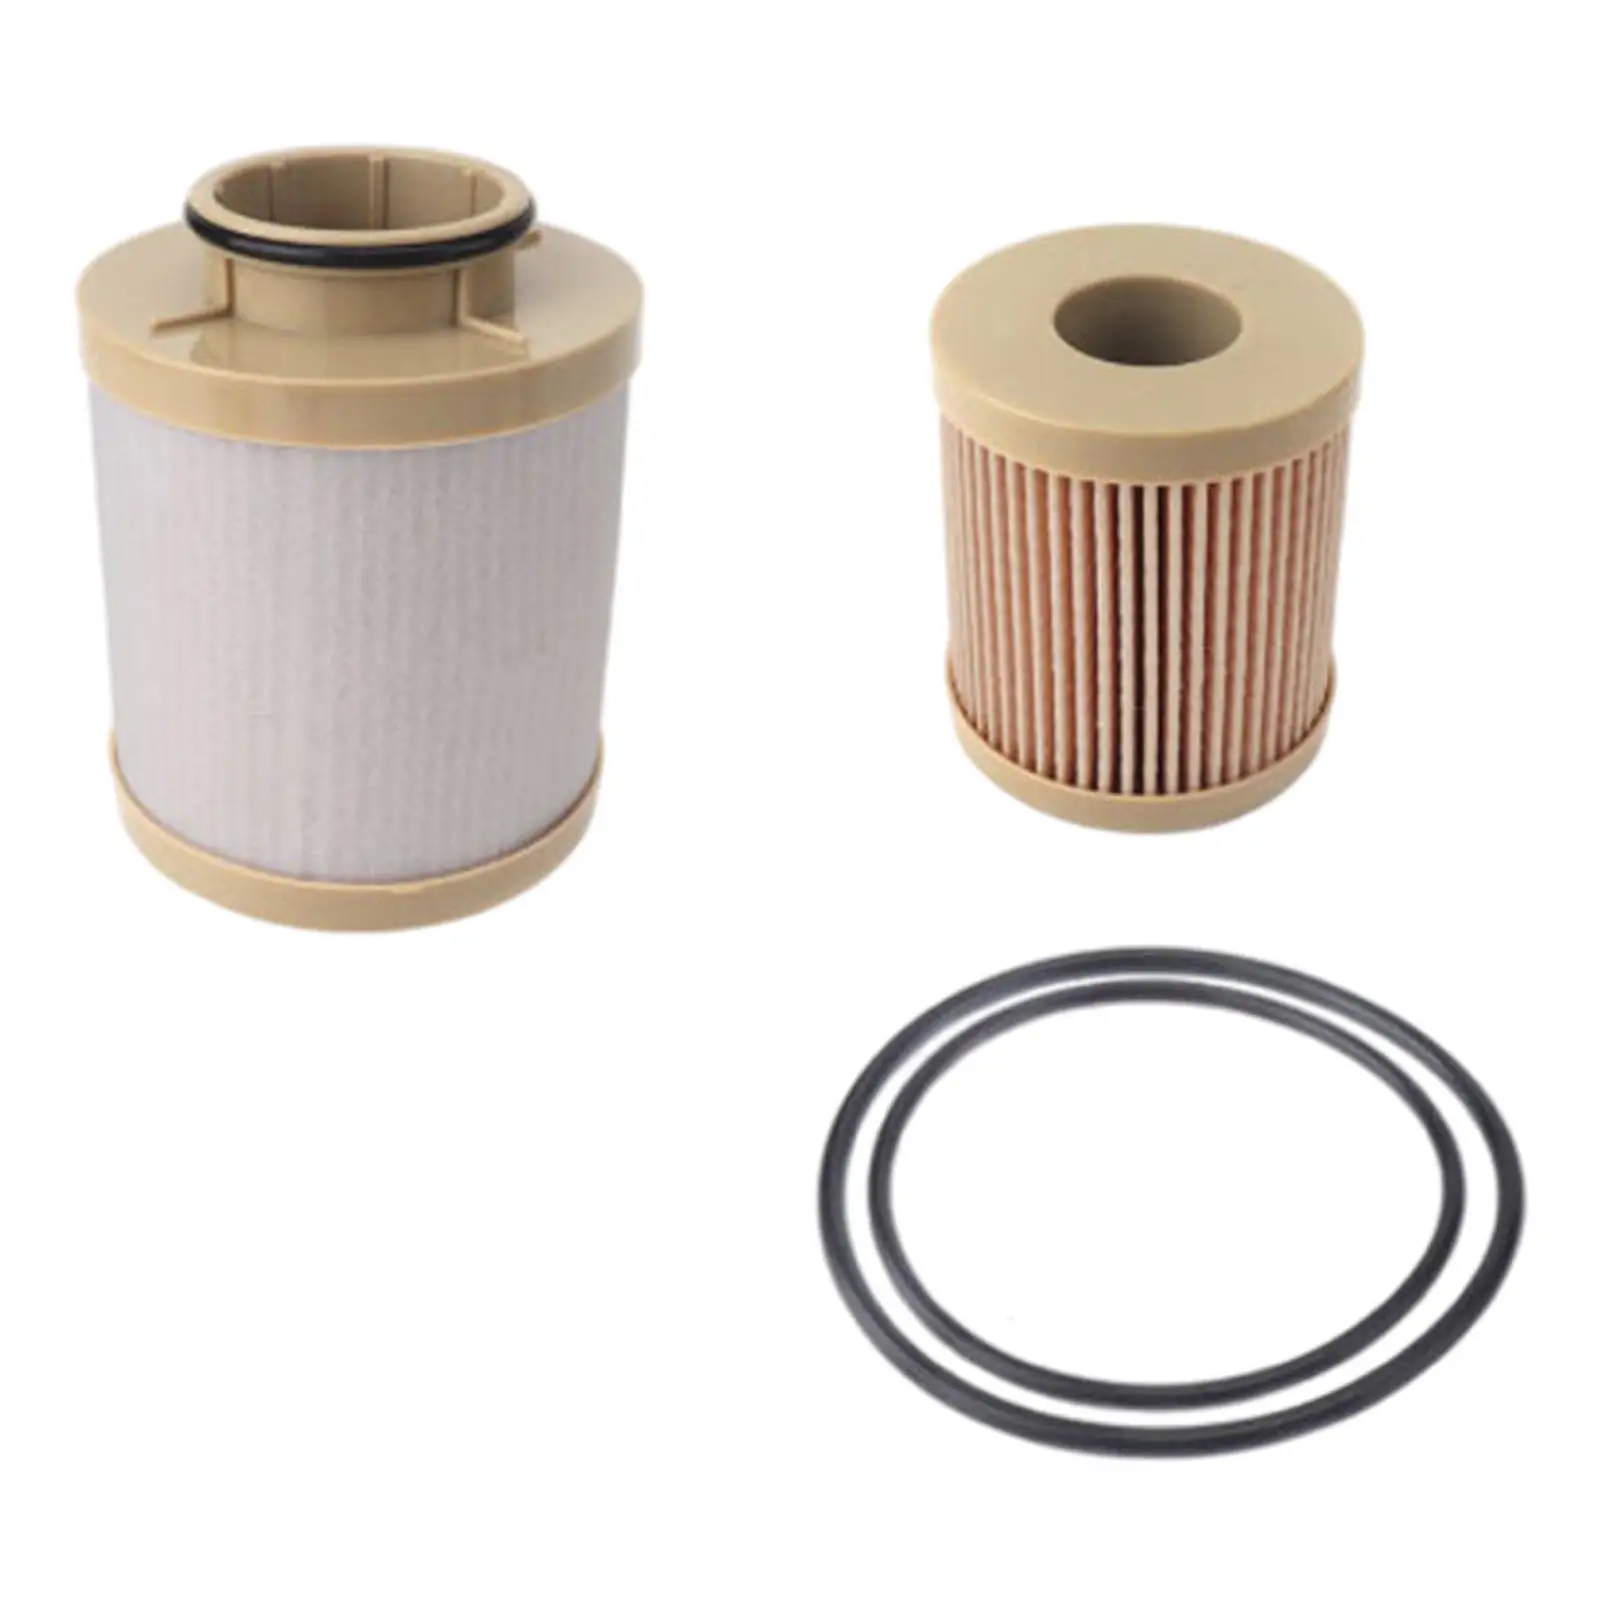 Fuel Filters 6.0L Powerstroke Turbo FD4616 Fit for Ford F450 Truck 2008-2010 Direct Replaces Spare Parts Professional